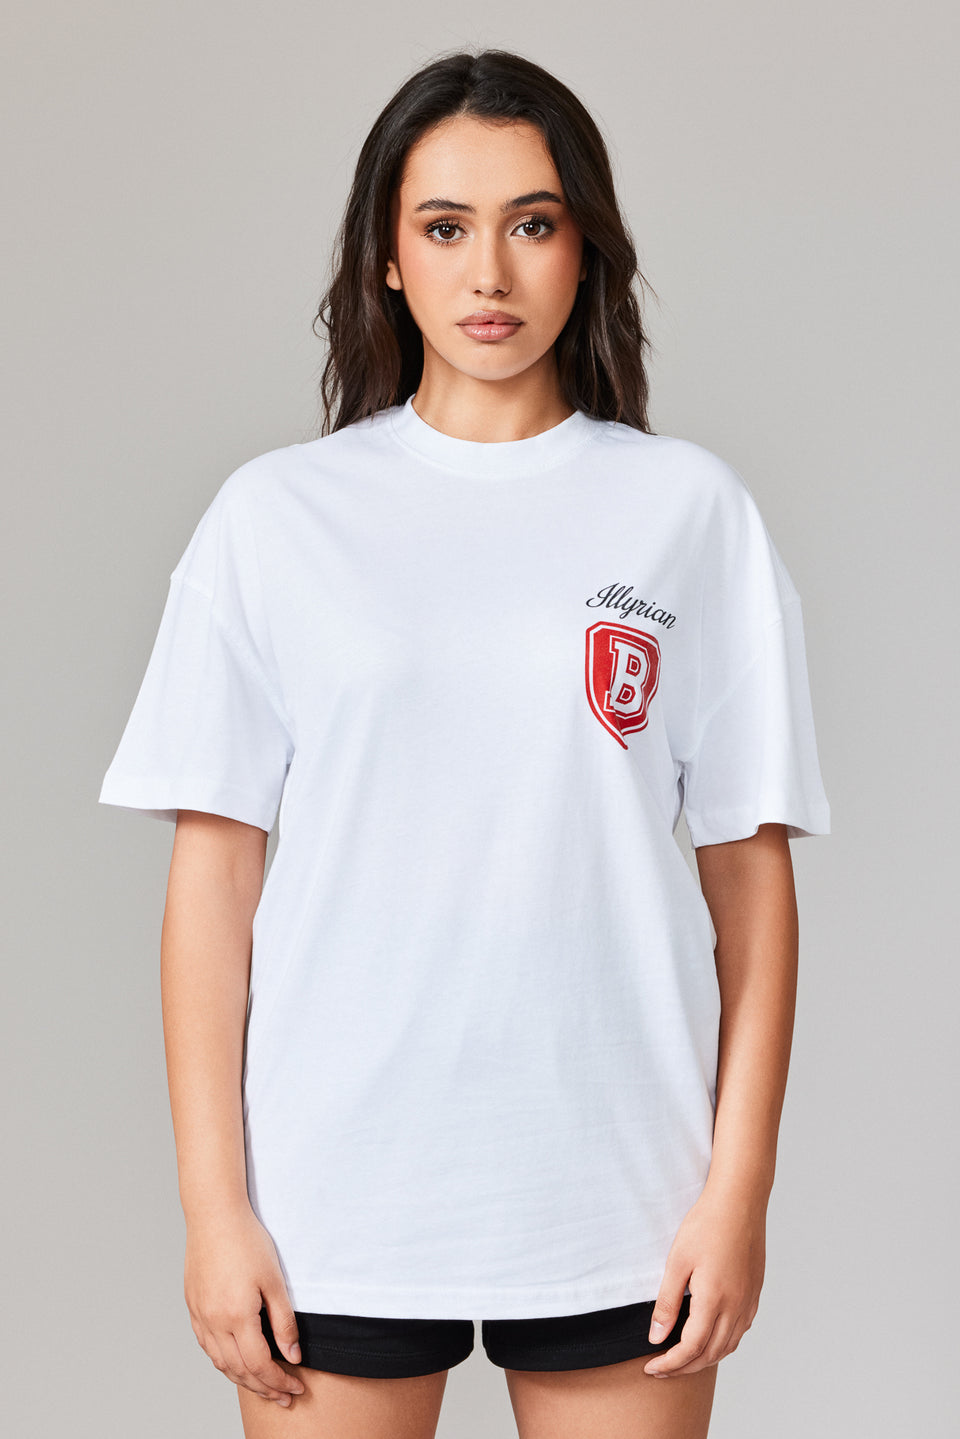 Flag Of Arms T-shirt - White